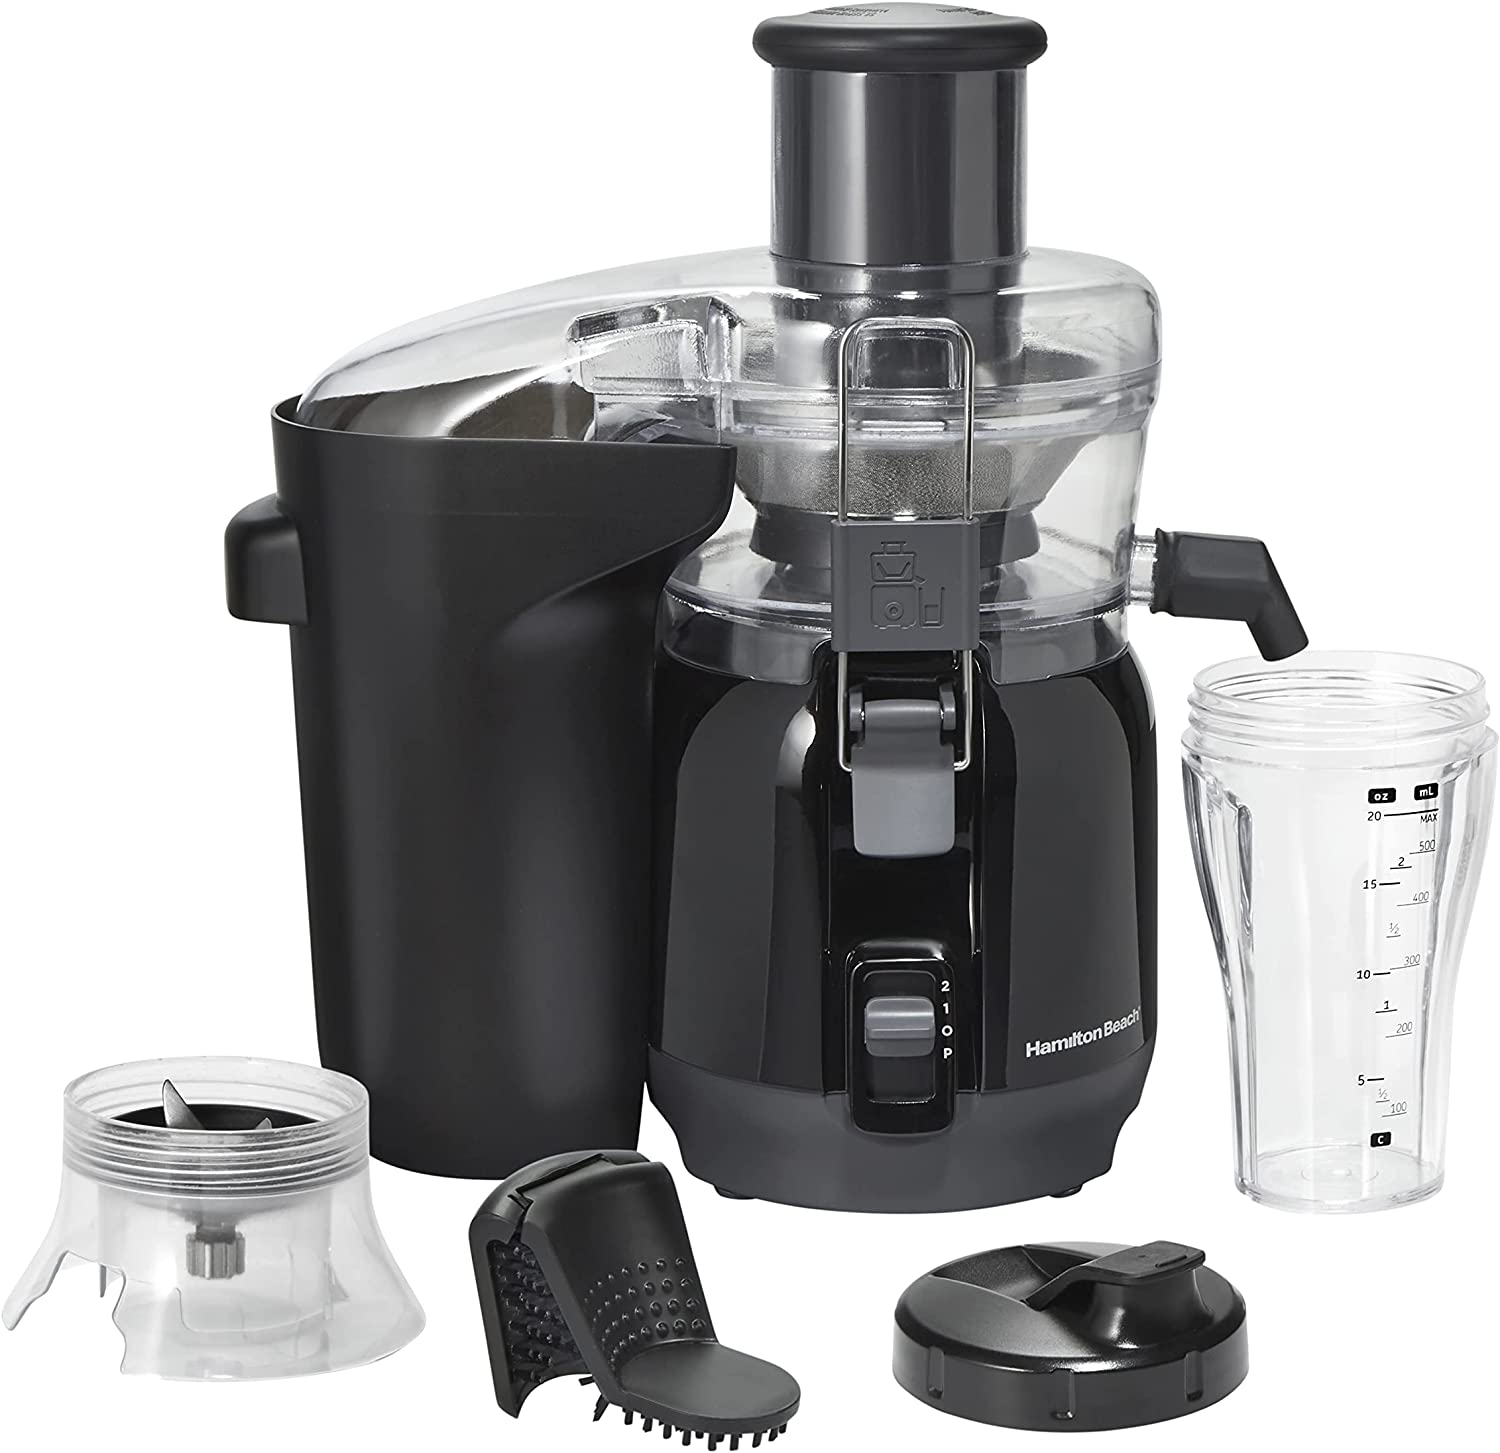 Hamilton Beach Juice & Blend 2-in-1 Juicer Machine and 20 oz. Blender, Big Mouth Large 3” Feed Chute for Whole Fruits and